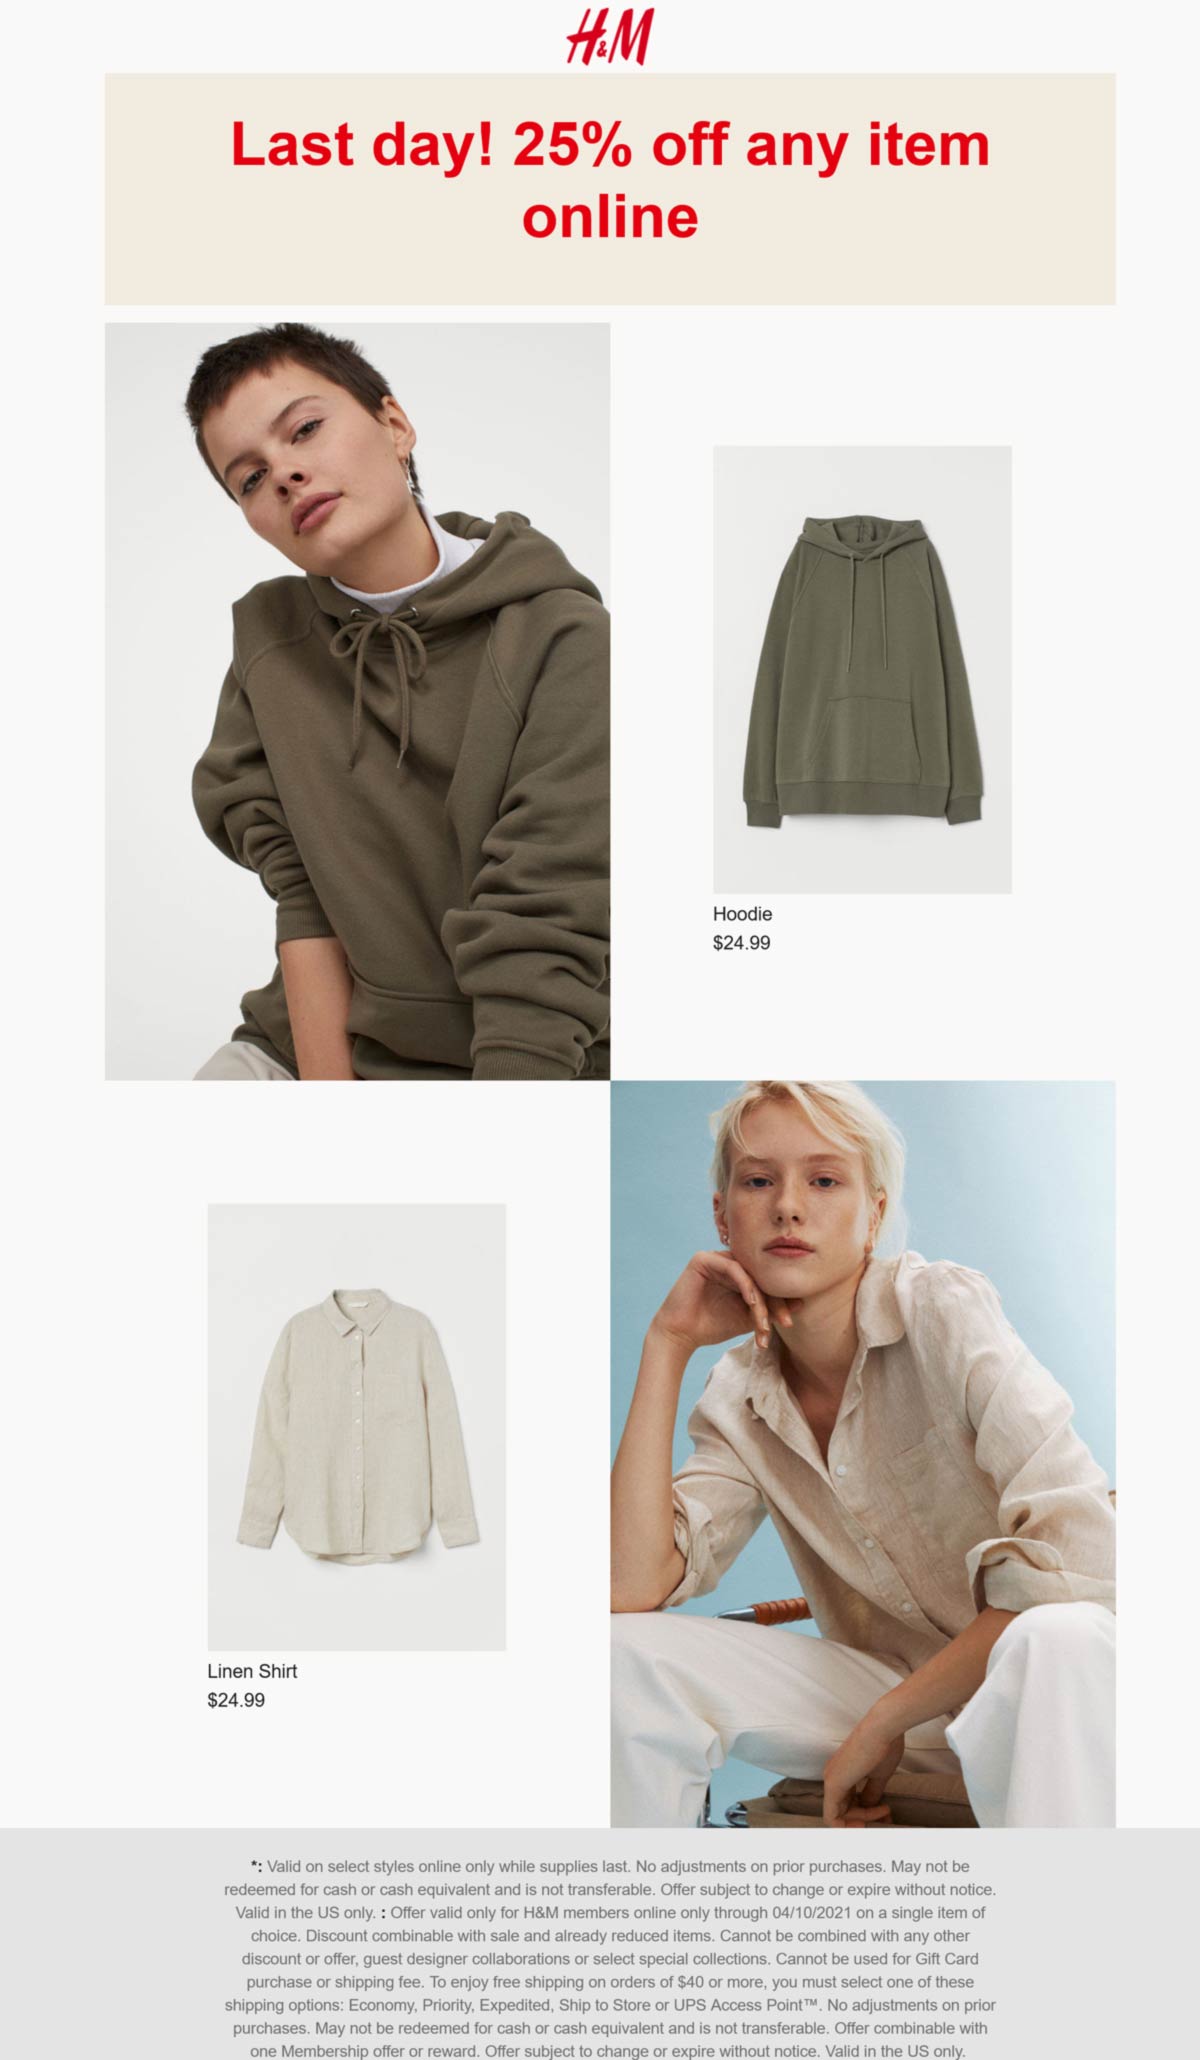 H&M stores Coupon  25% off a single item online today for members at H&M #hm 